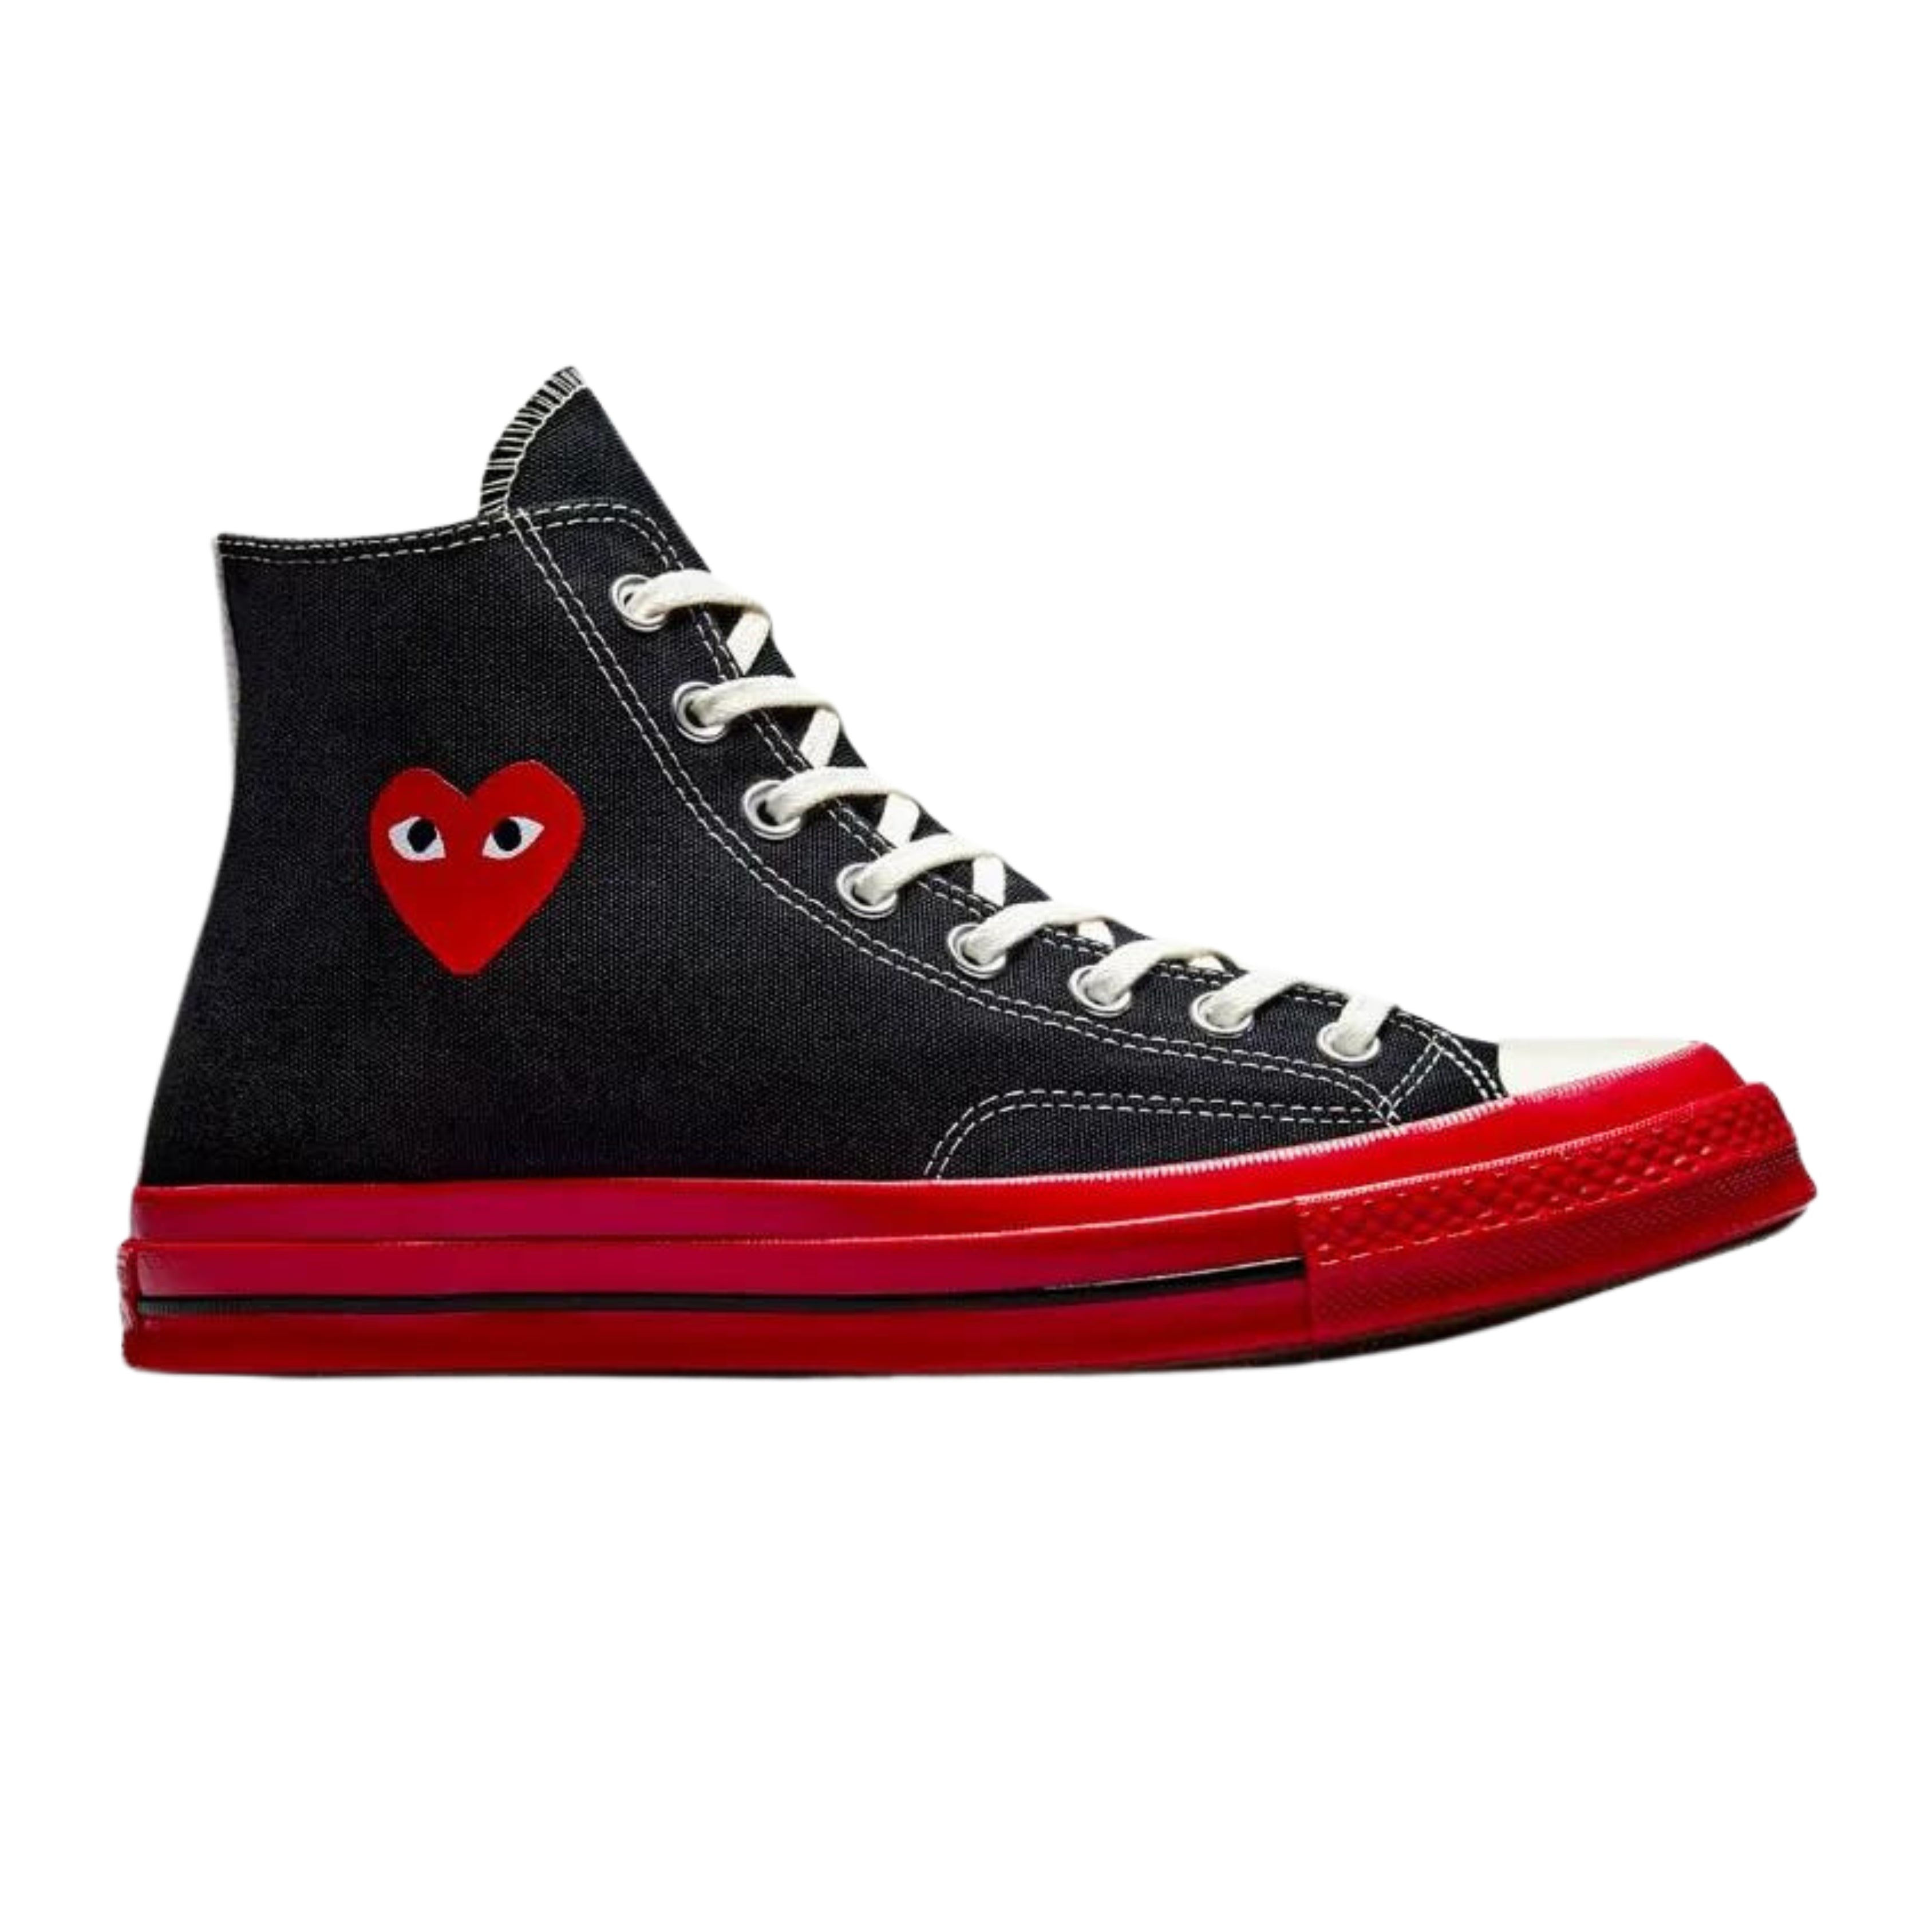 Converse Chuck Taylor All Star 70 Hi Comme des Garcons PLAY Black Red Midsole